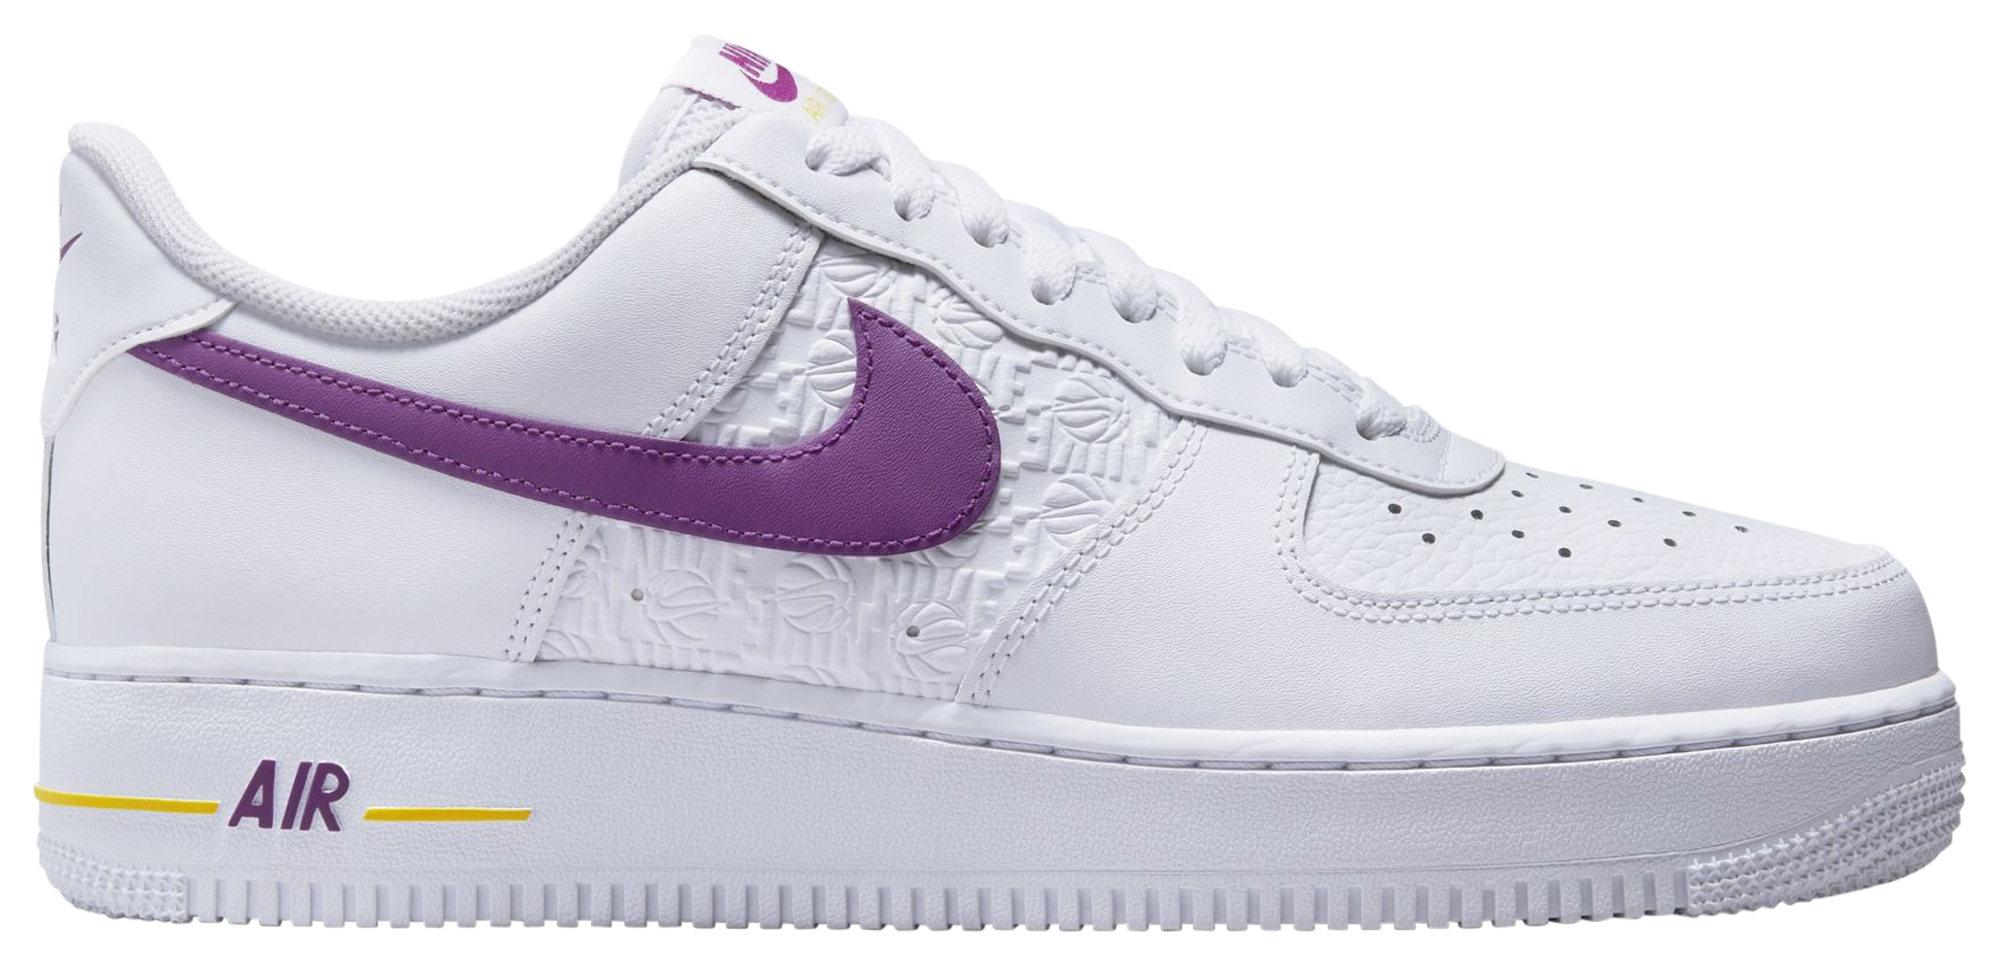 Nike Mens Air Force 1 '07 Flc - Shoes White/Bold Berry/Speed Yellow Size 10.5